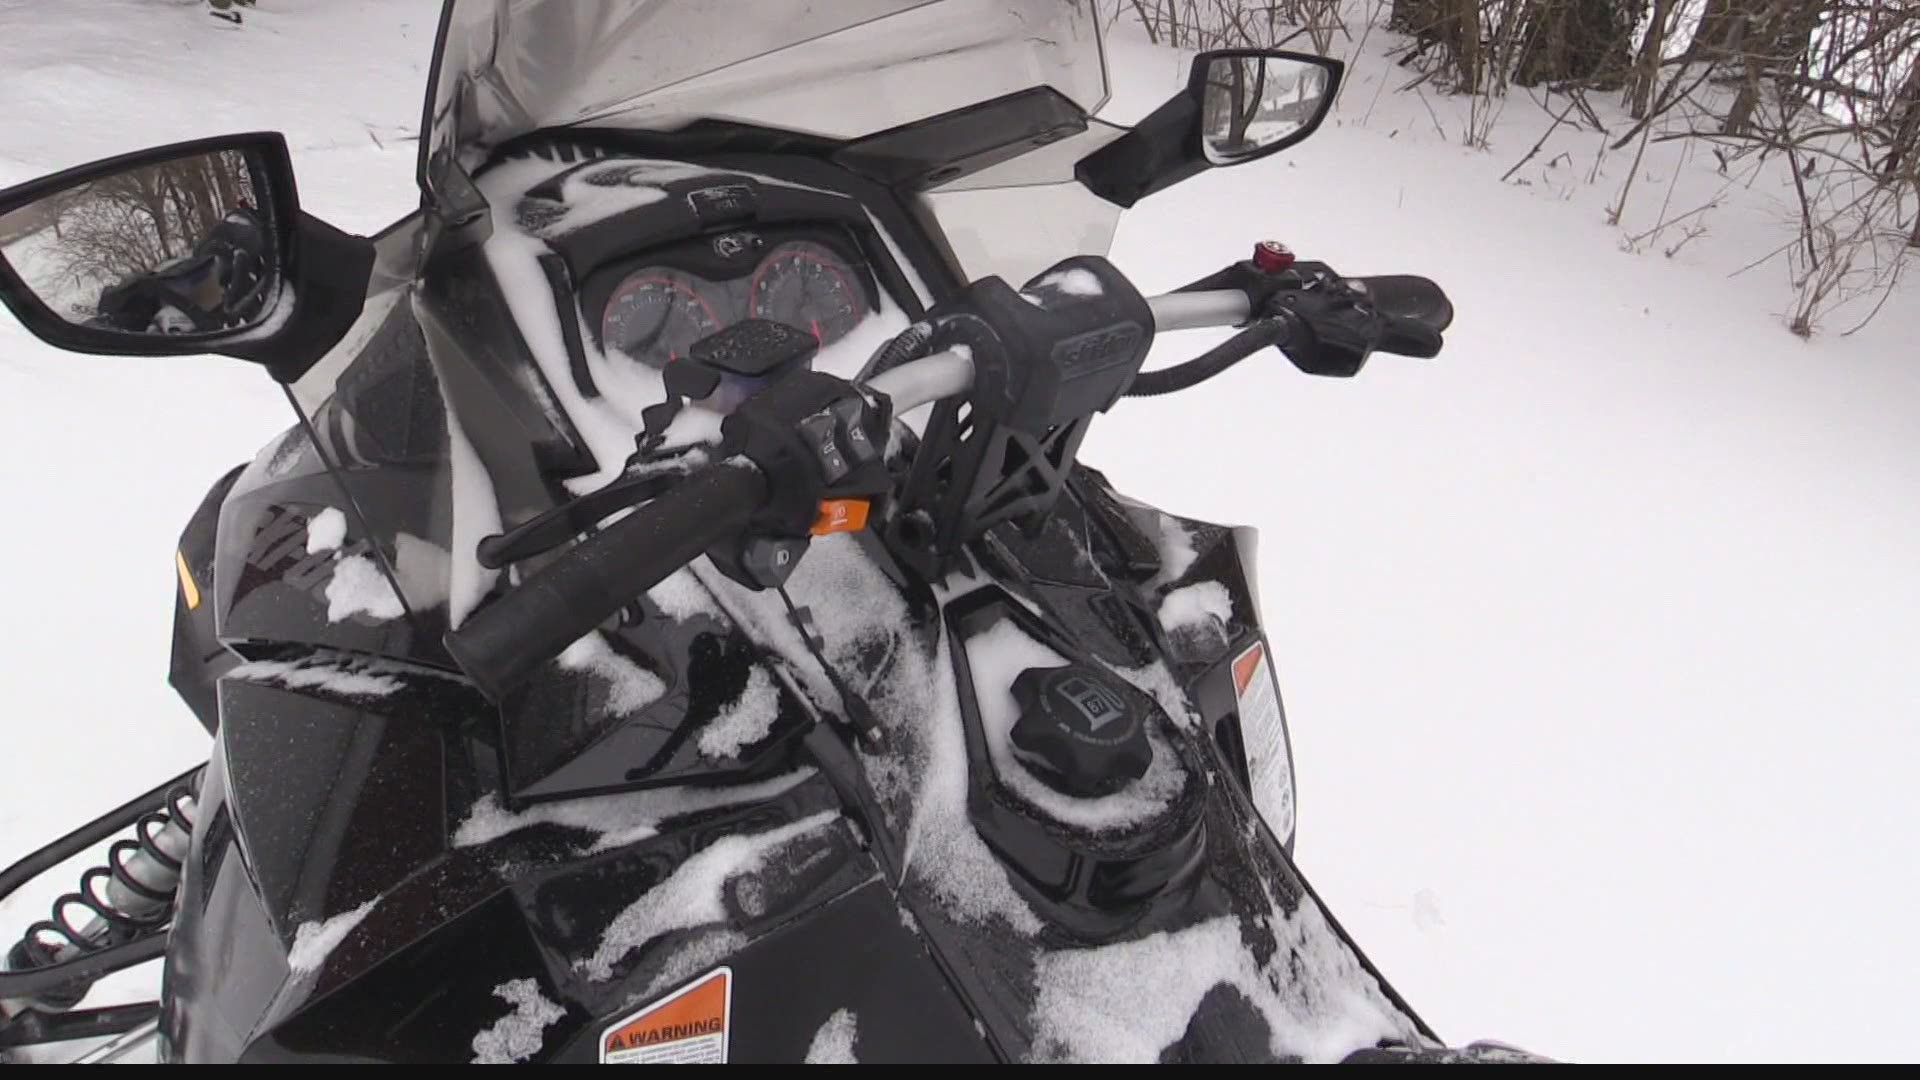 With the snow, there's concern people in an emergency could get stuck. Now dozens of neighbors with snowmobiles are coming to the rescue in Johnson County.